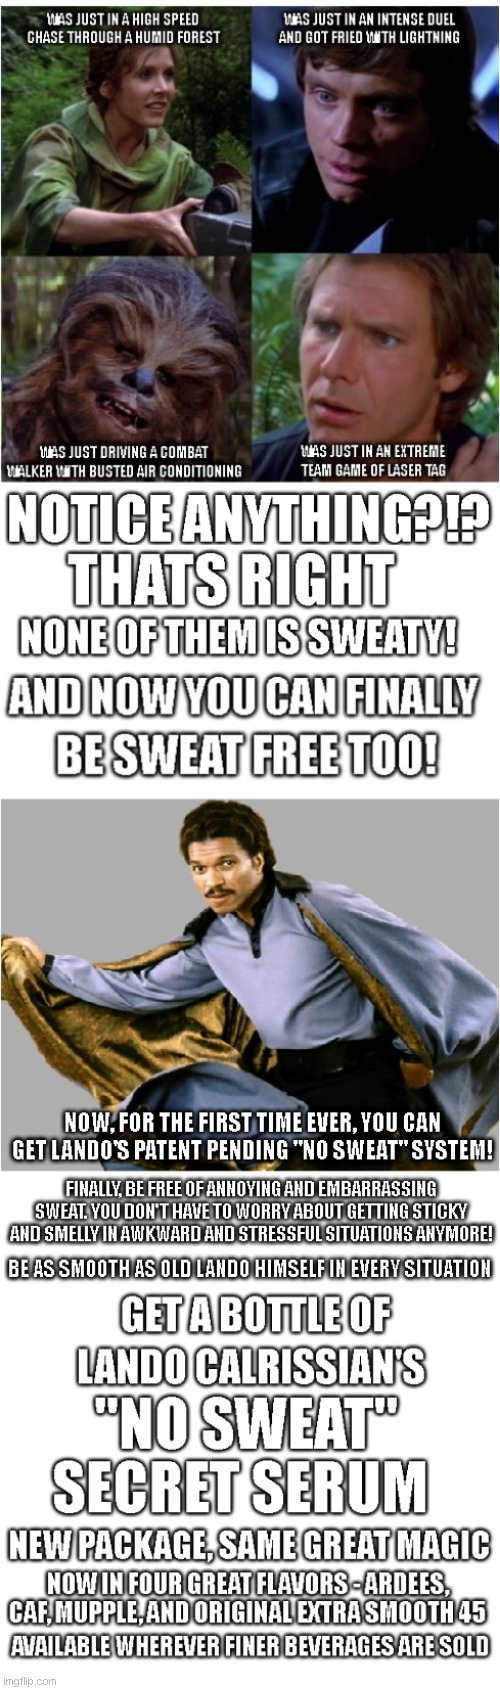 Extra Smooth 45 | image tagged in lando calrissian,star wars,smooth,sweat | made w/ Imgflip meme maker